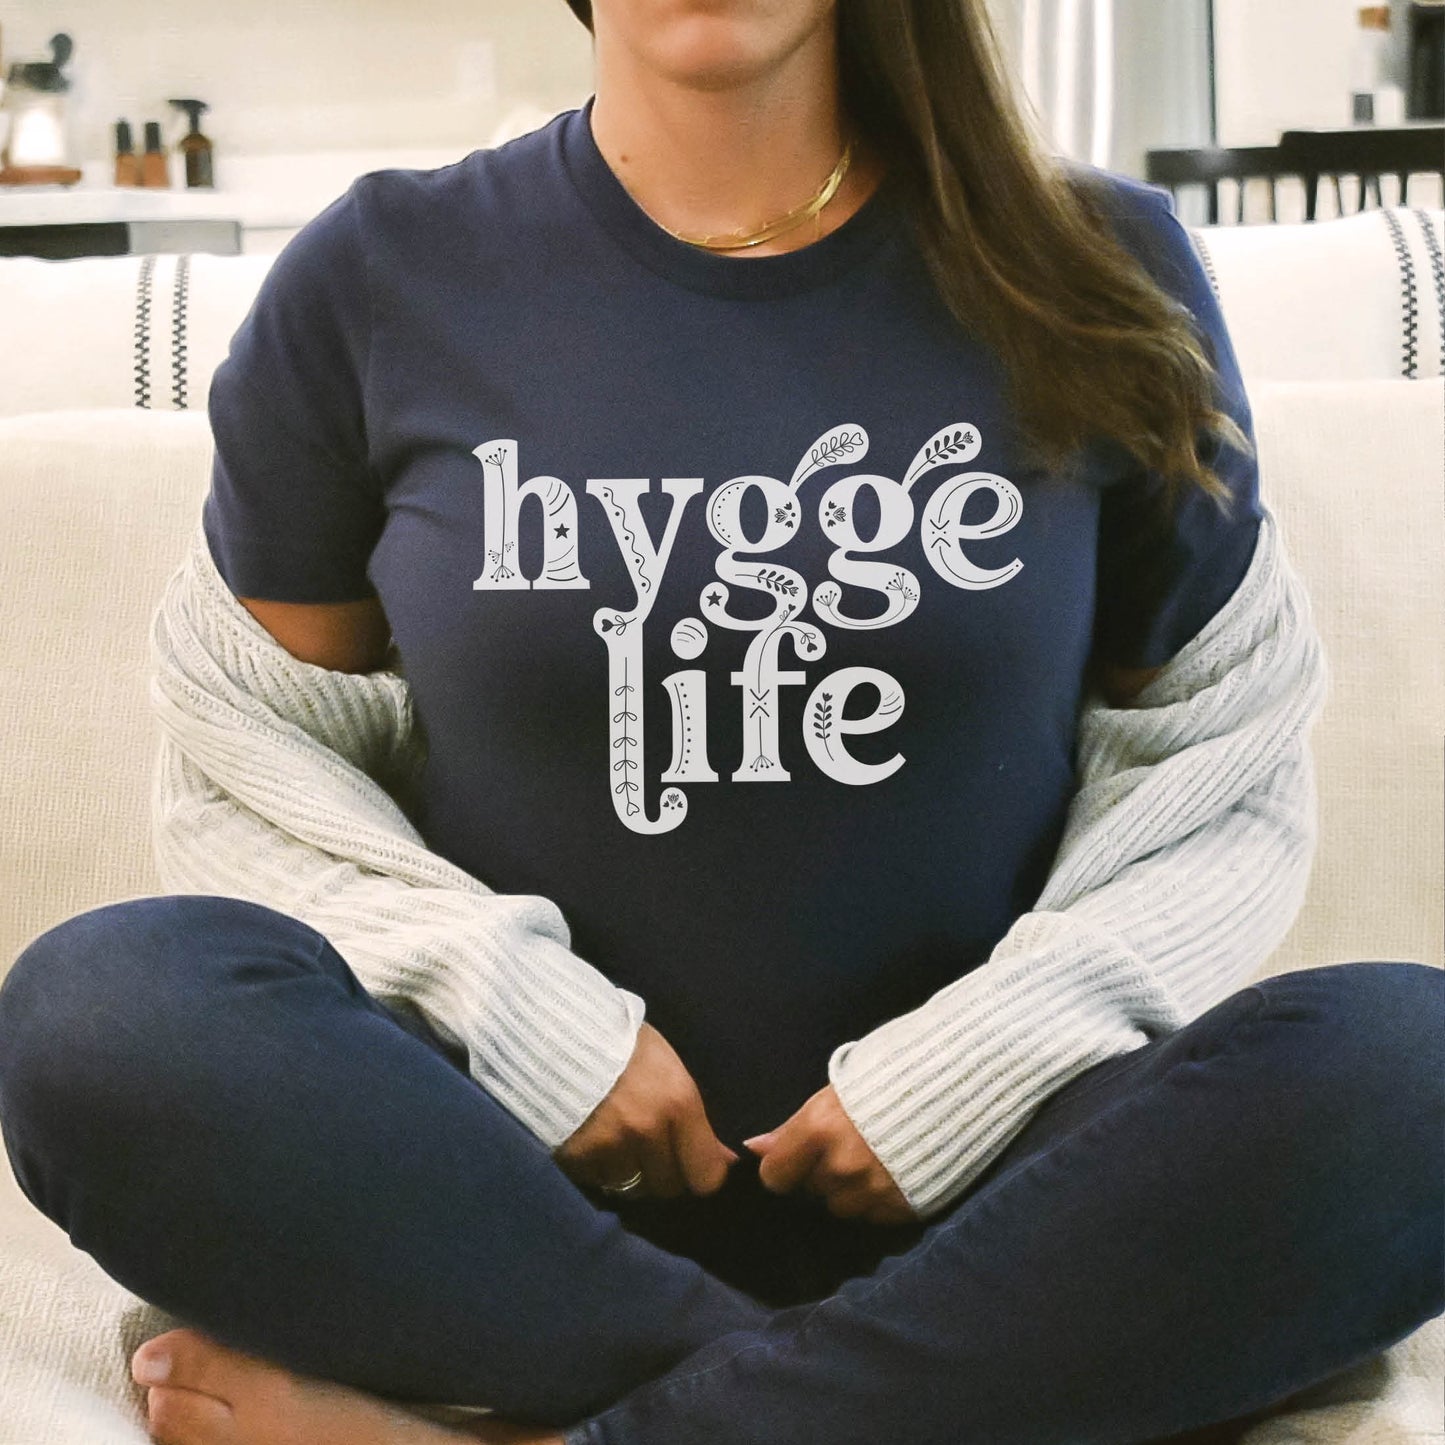 Coziness vibes woman wearing a warm sweater and Navy Blue "Hygge Life" quote Holy Hygge Women's unisex Christian t-shirt with Scandinavian floral and heart art for the cozy fall and winter season